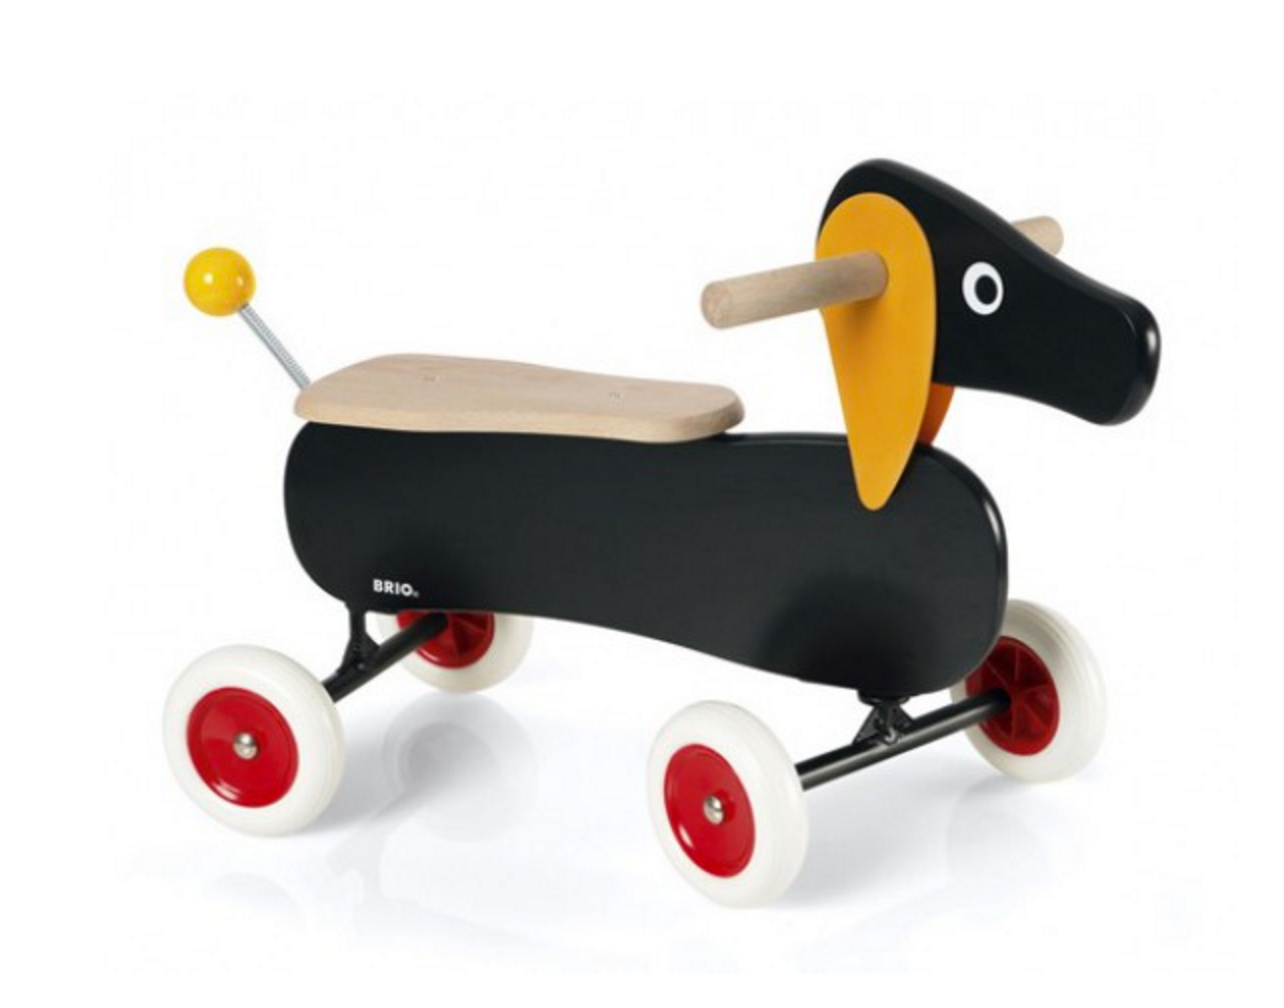 Brio ride-on dachshund: Best ride-on toys for kids